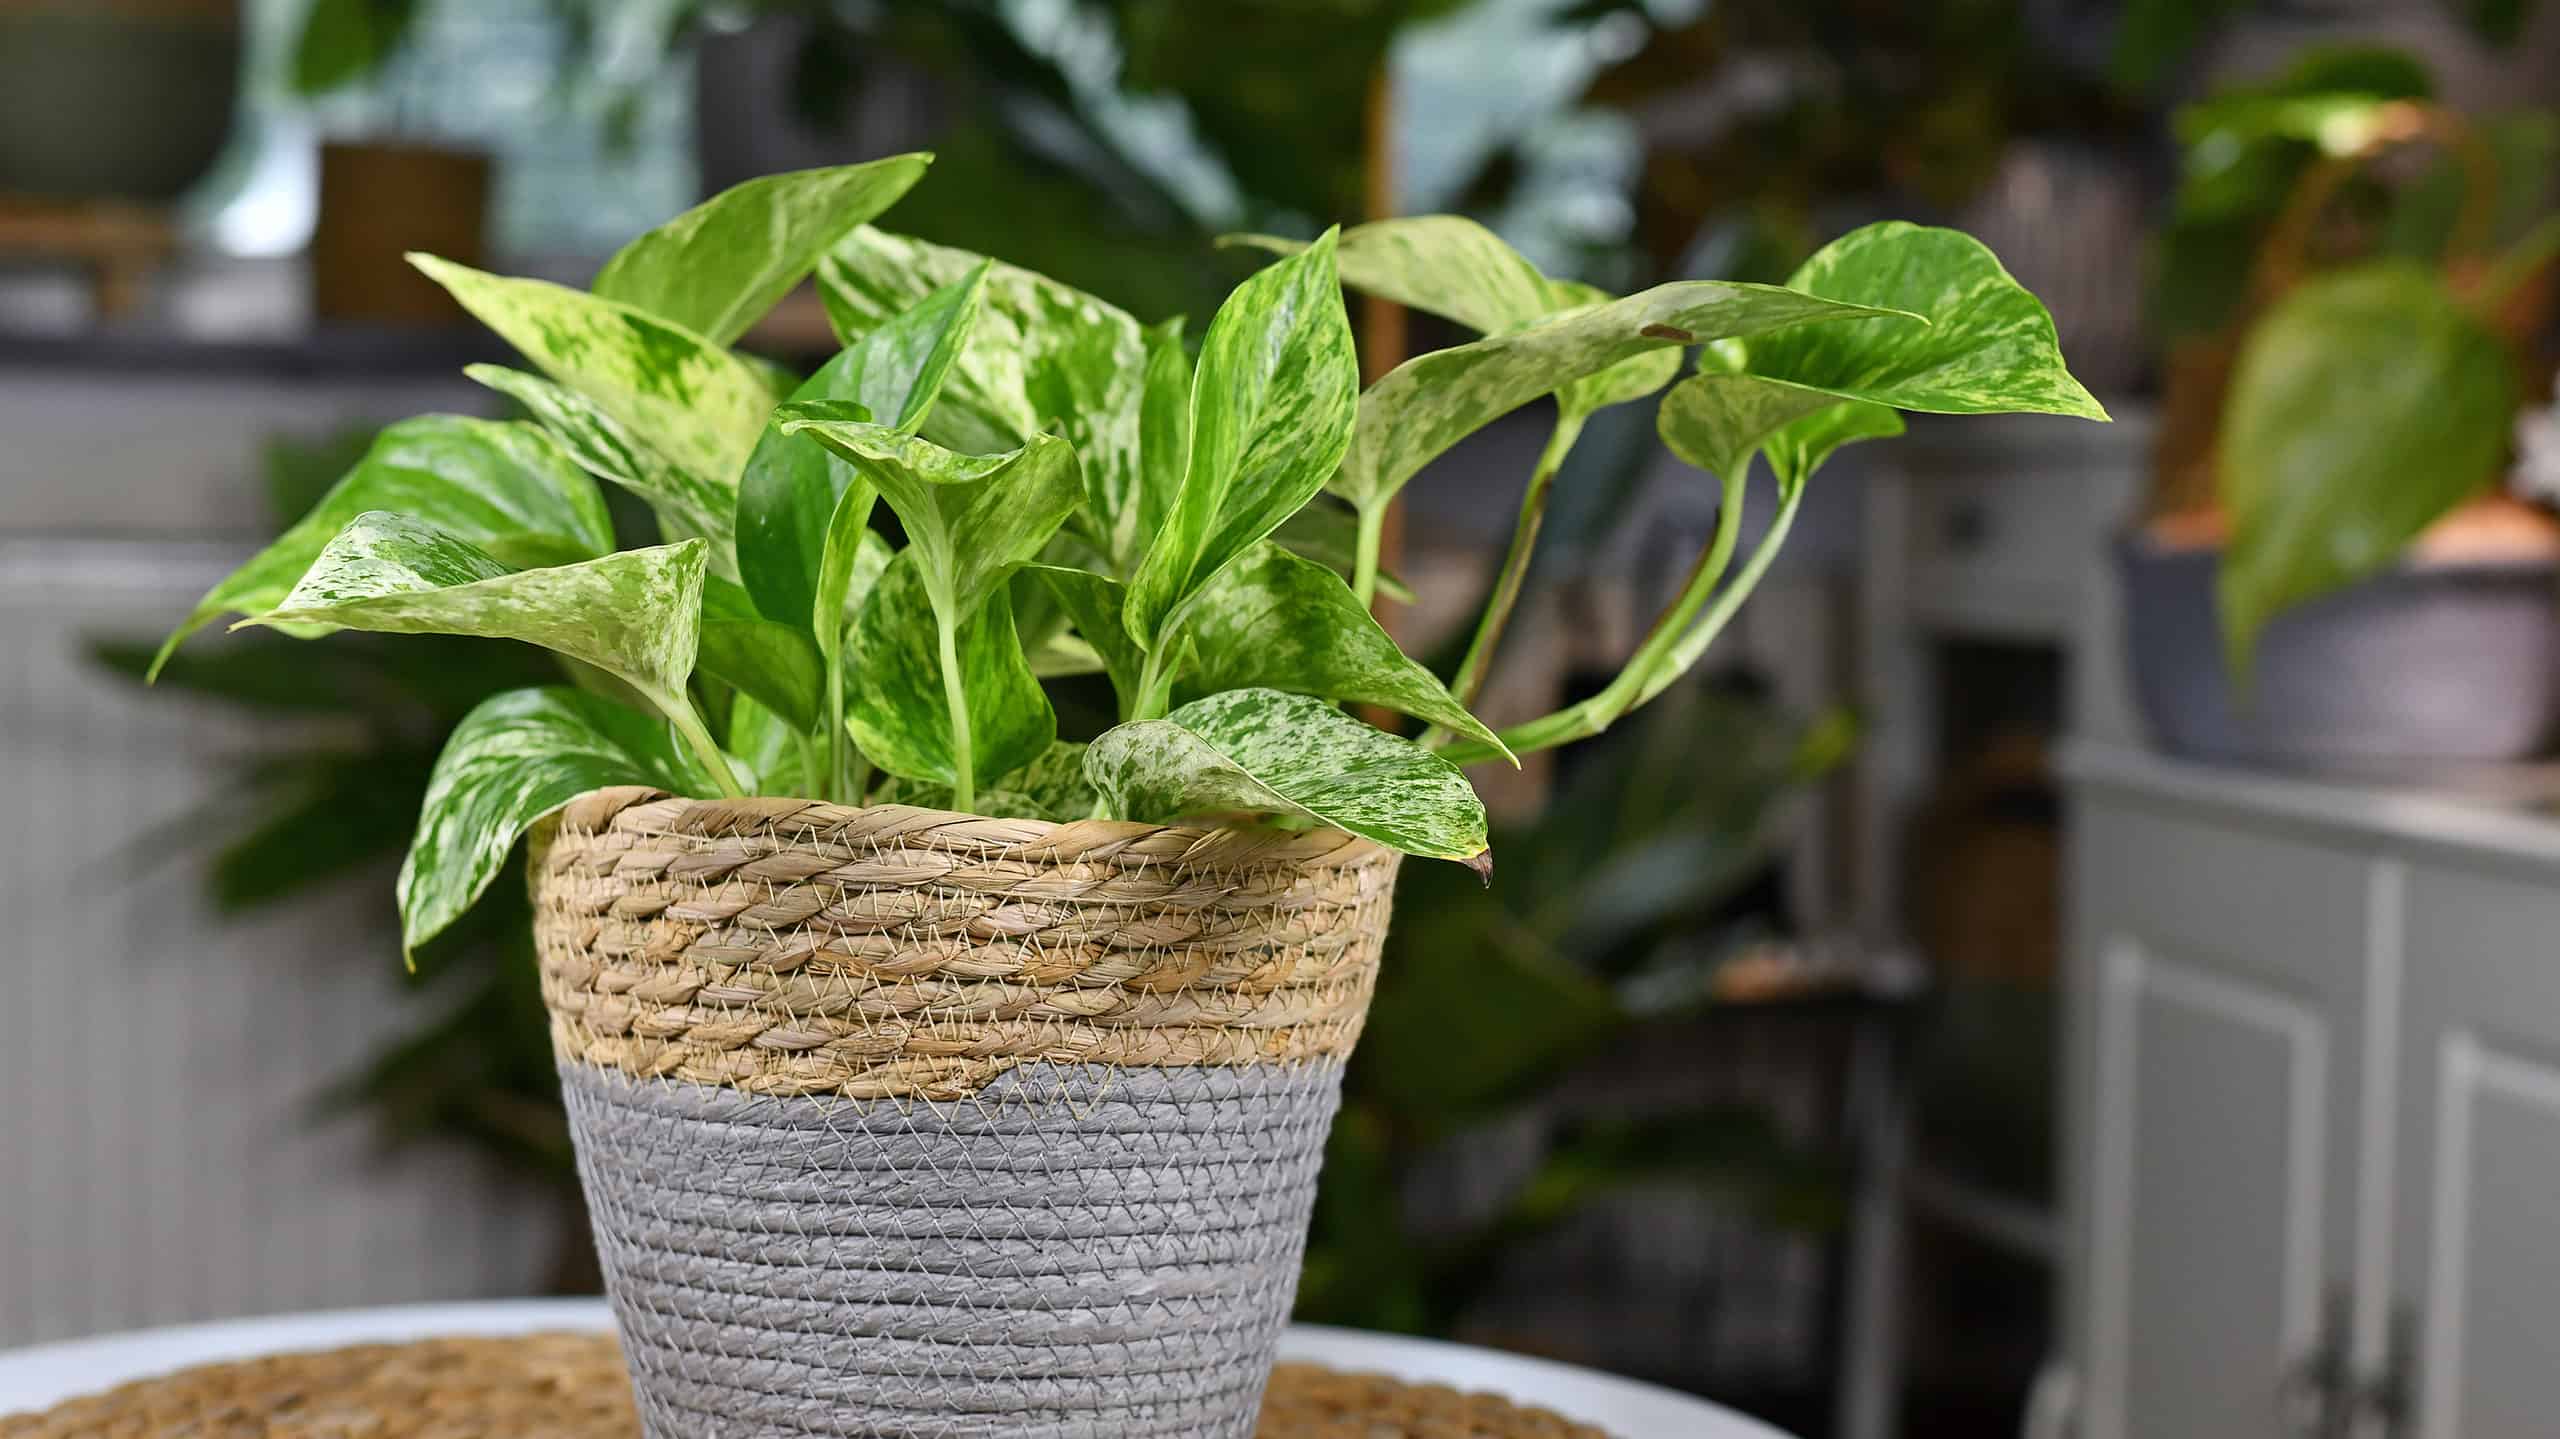 Tropical 'Epipremnum Aureum Marble Queen' pothos house plant with white variegation in natural basket flower pot on table